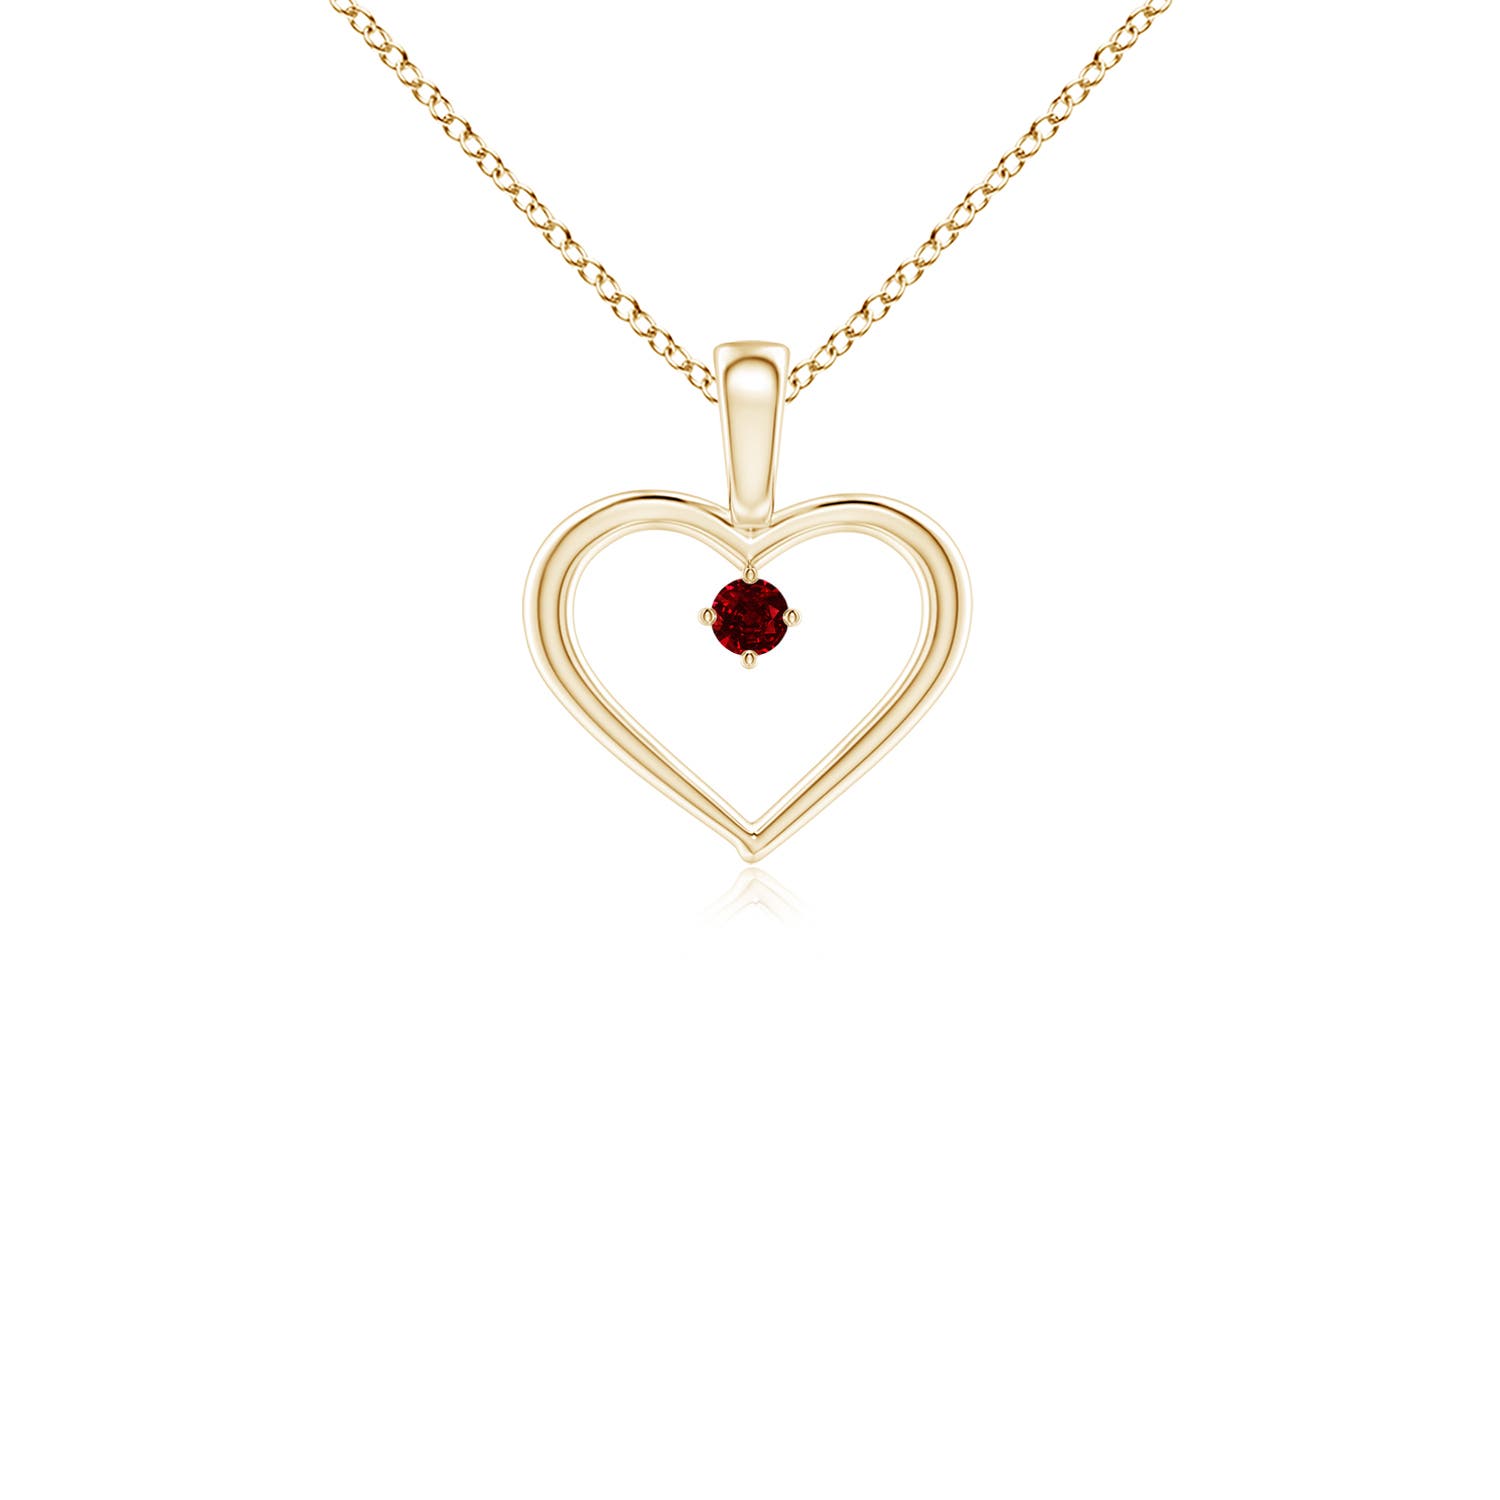 AAAA - Ruby / 0.09 CT / 14 KT Yellow Gold